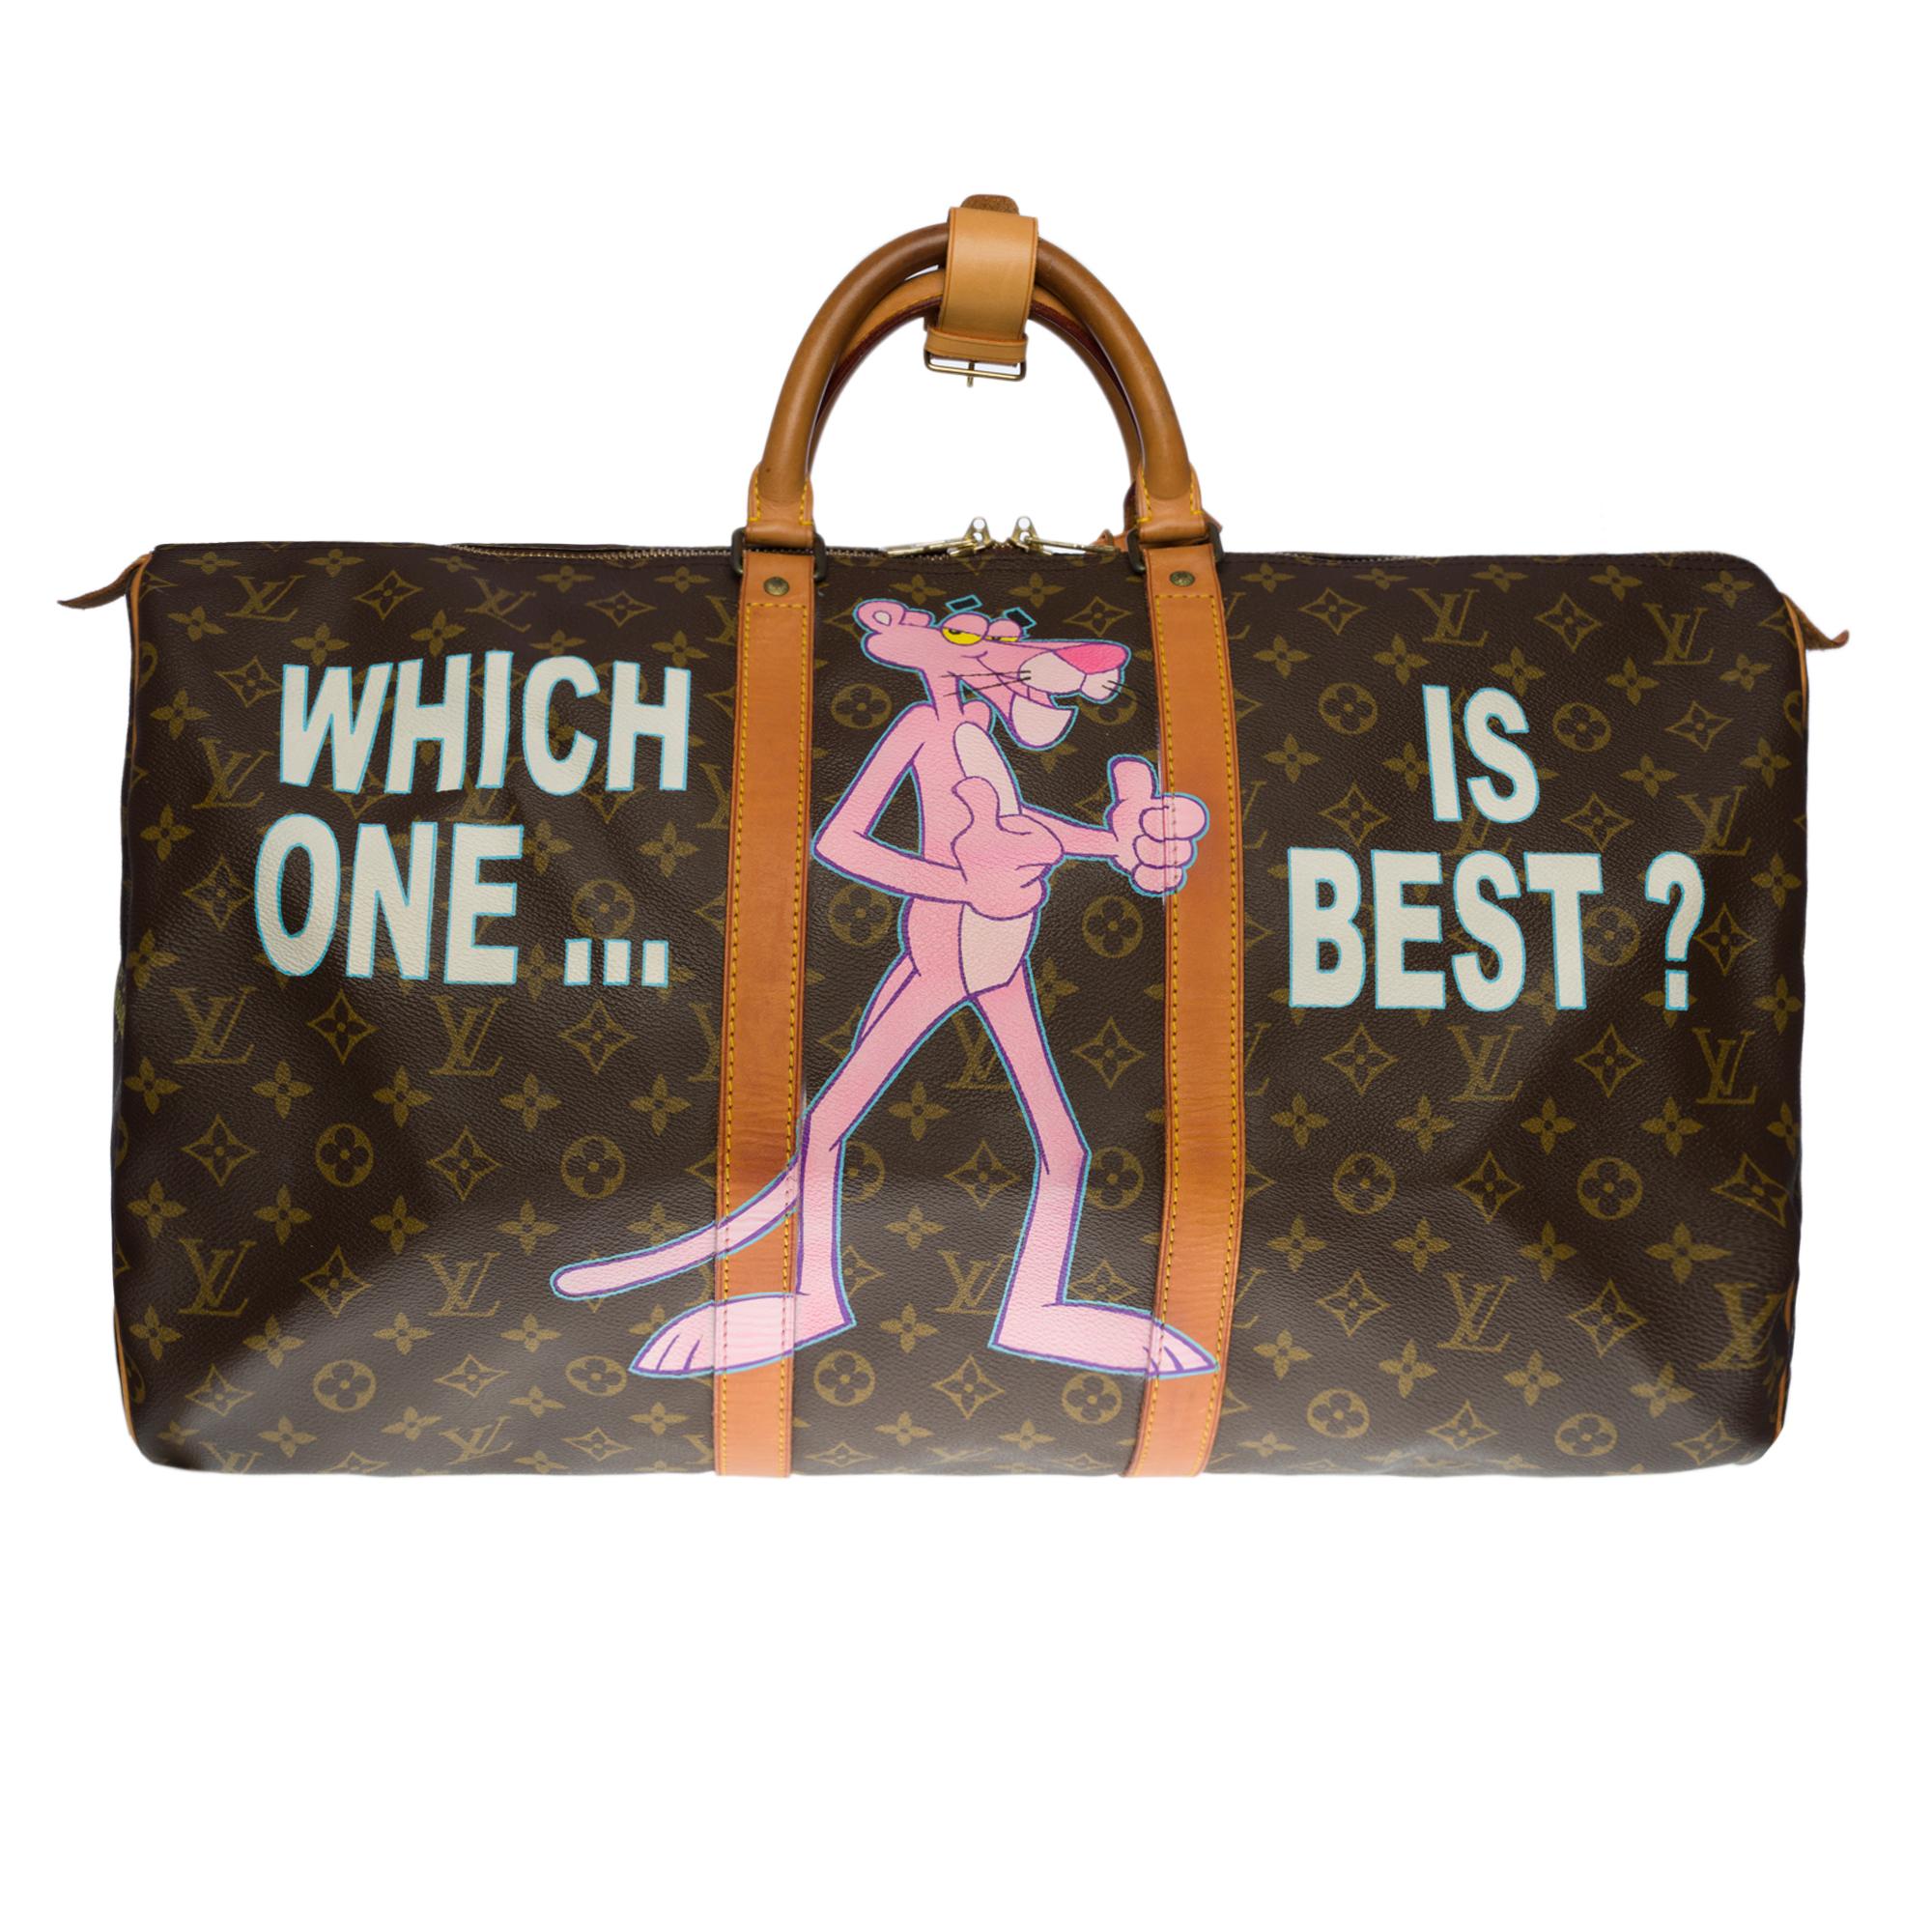 Superb Louis Vuitton Keepall 55 cm travel bag in Monogram canvas customized by the fashionable artist of Street Art PatBo putting in battle the two most famous brands of Champagne 